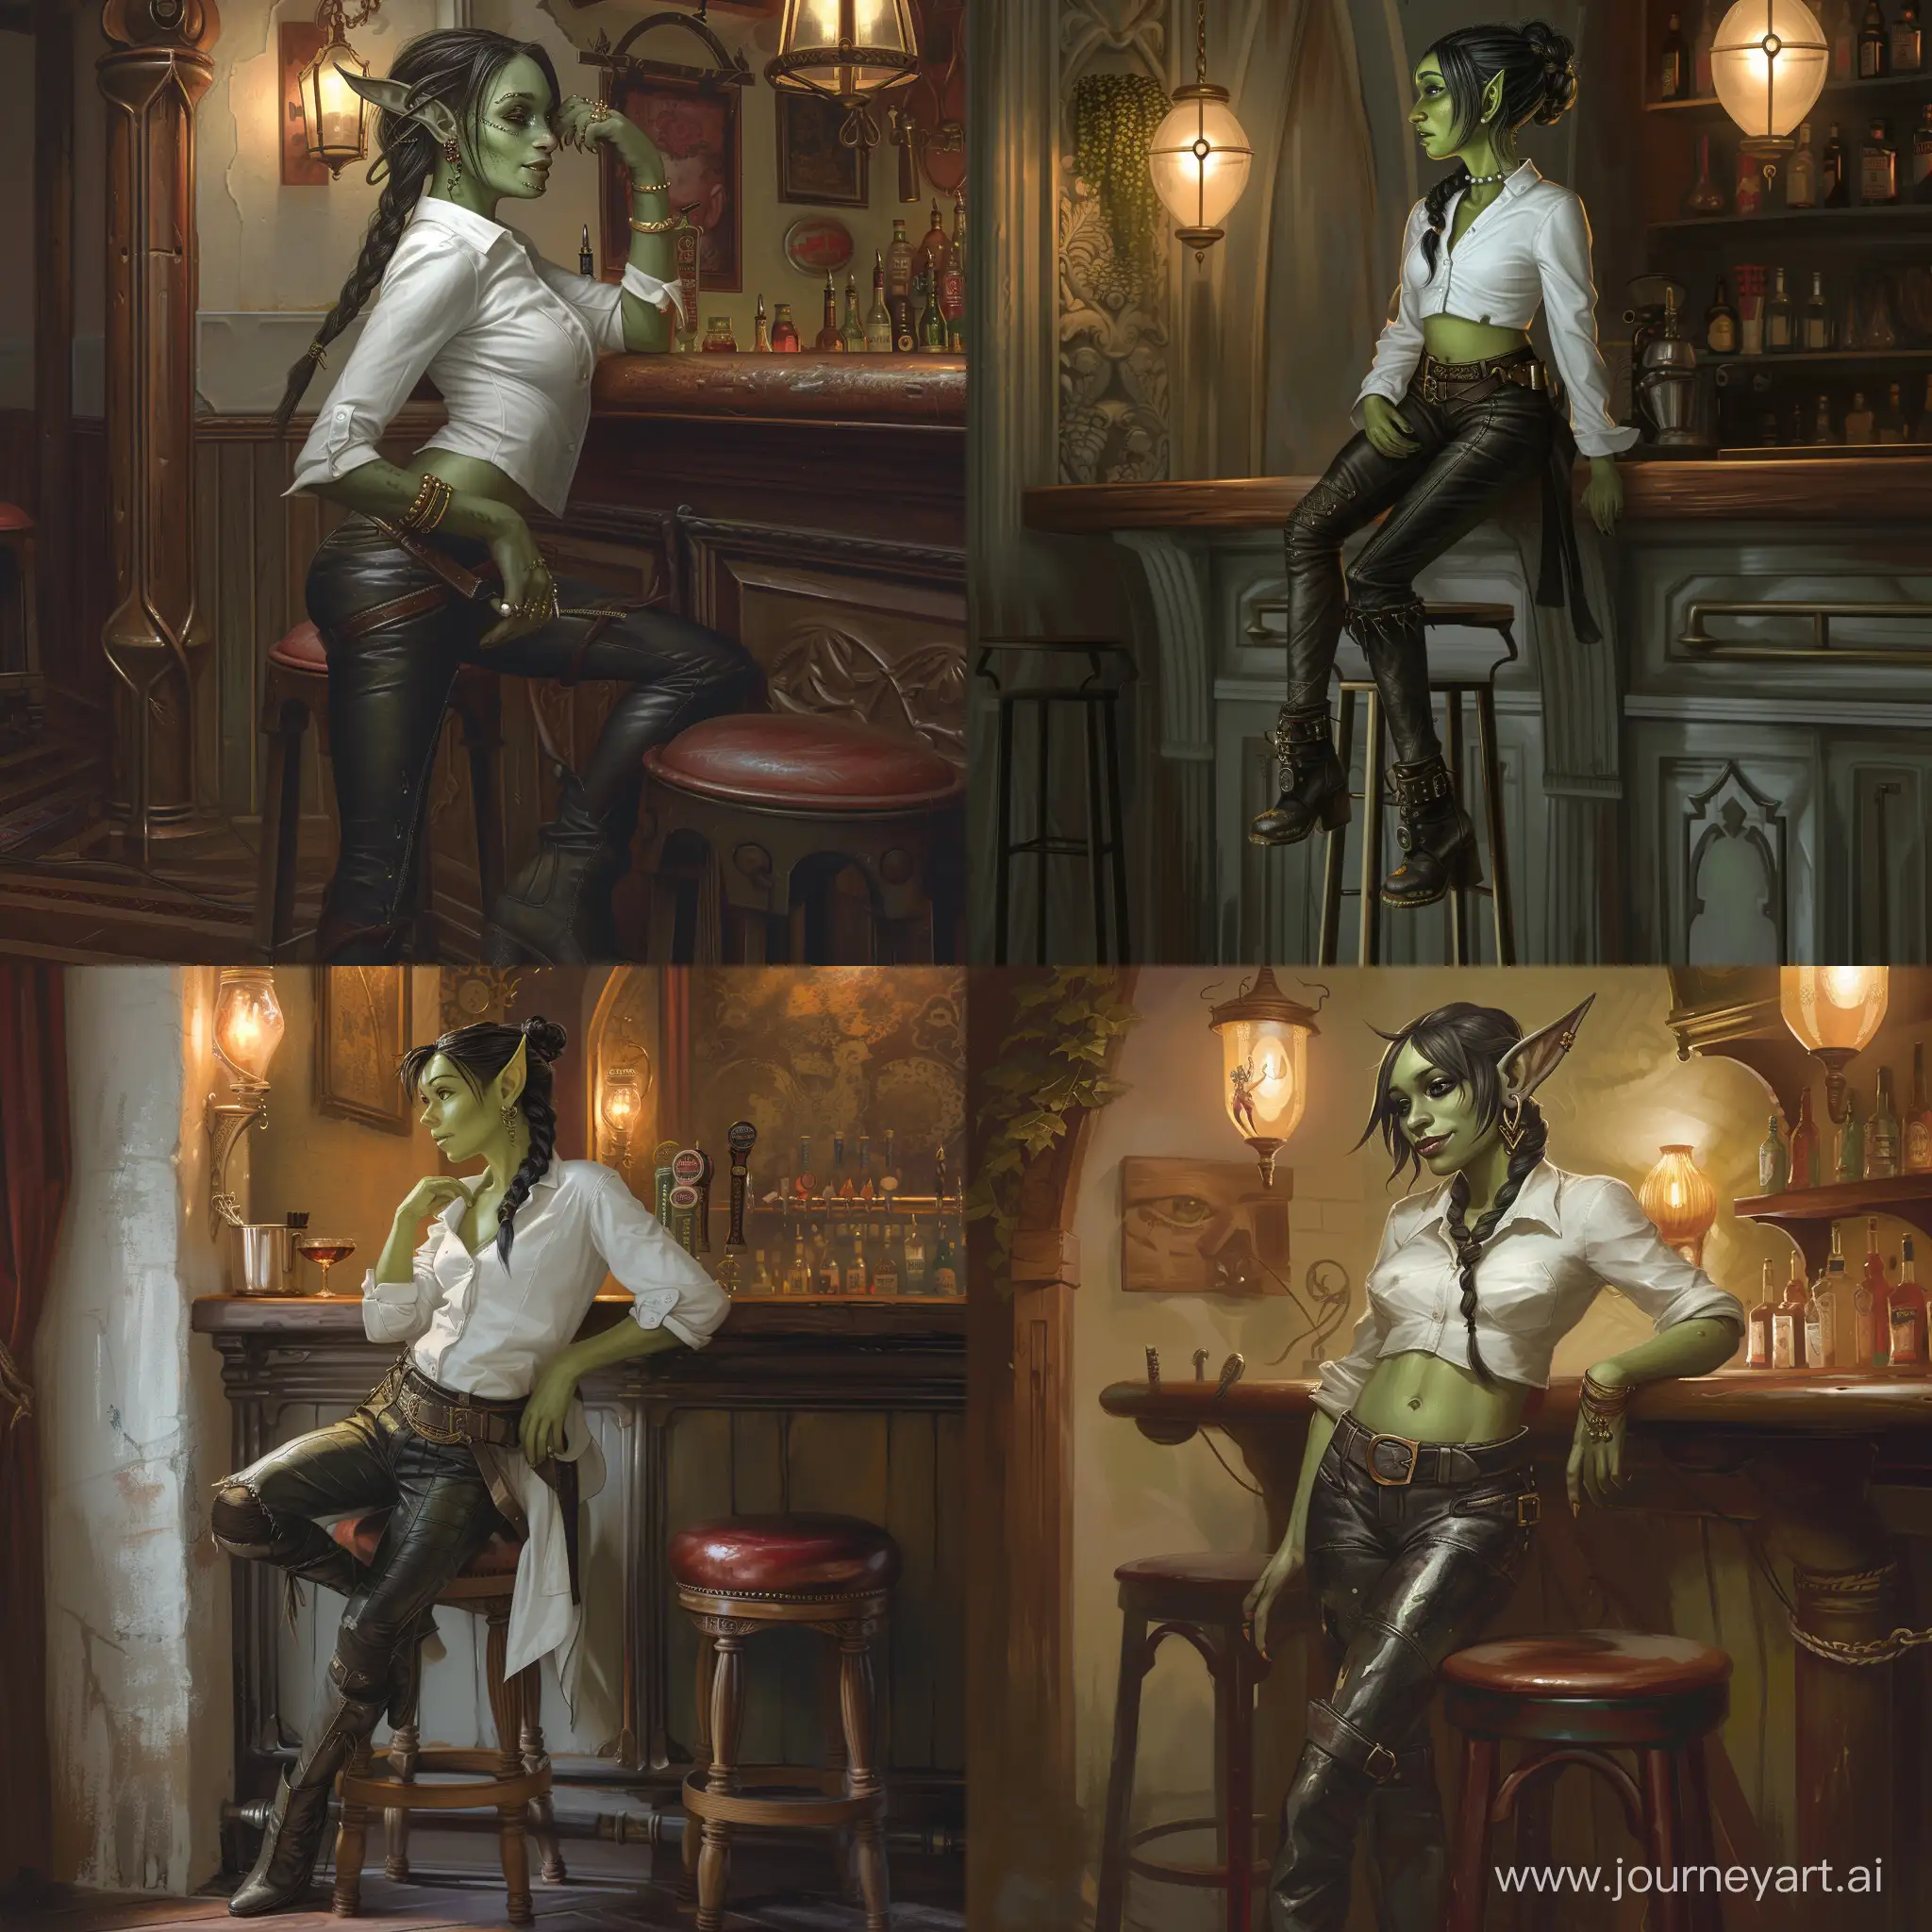 female goblin of short stature, with green skin and dark cage hair in a braid, and she dresses in a white shirt and leather pants, she is hanging out in a bar standing on a stool since she is too small to reach the bar